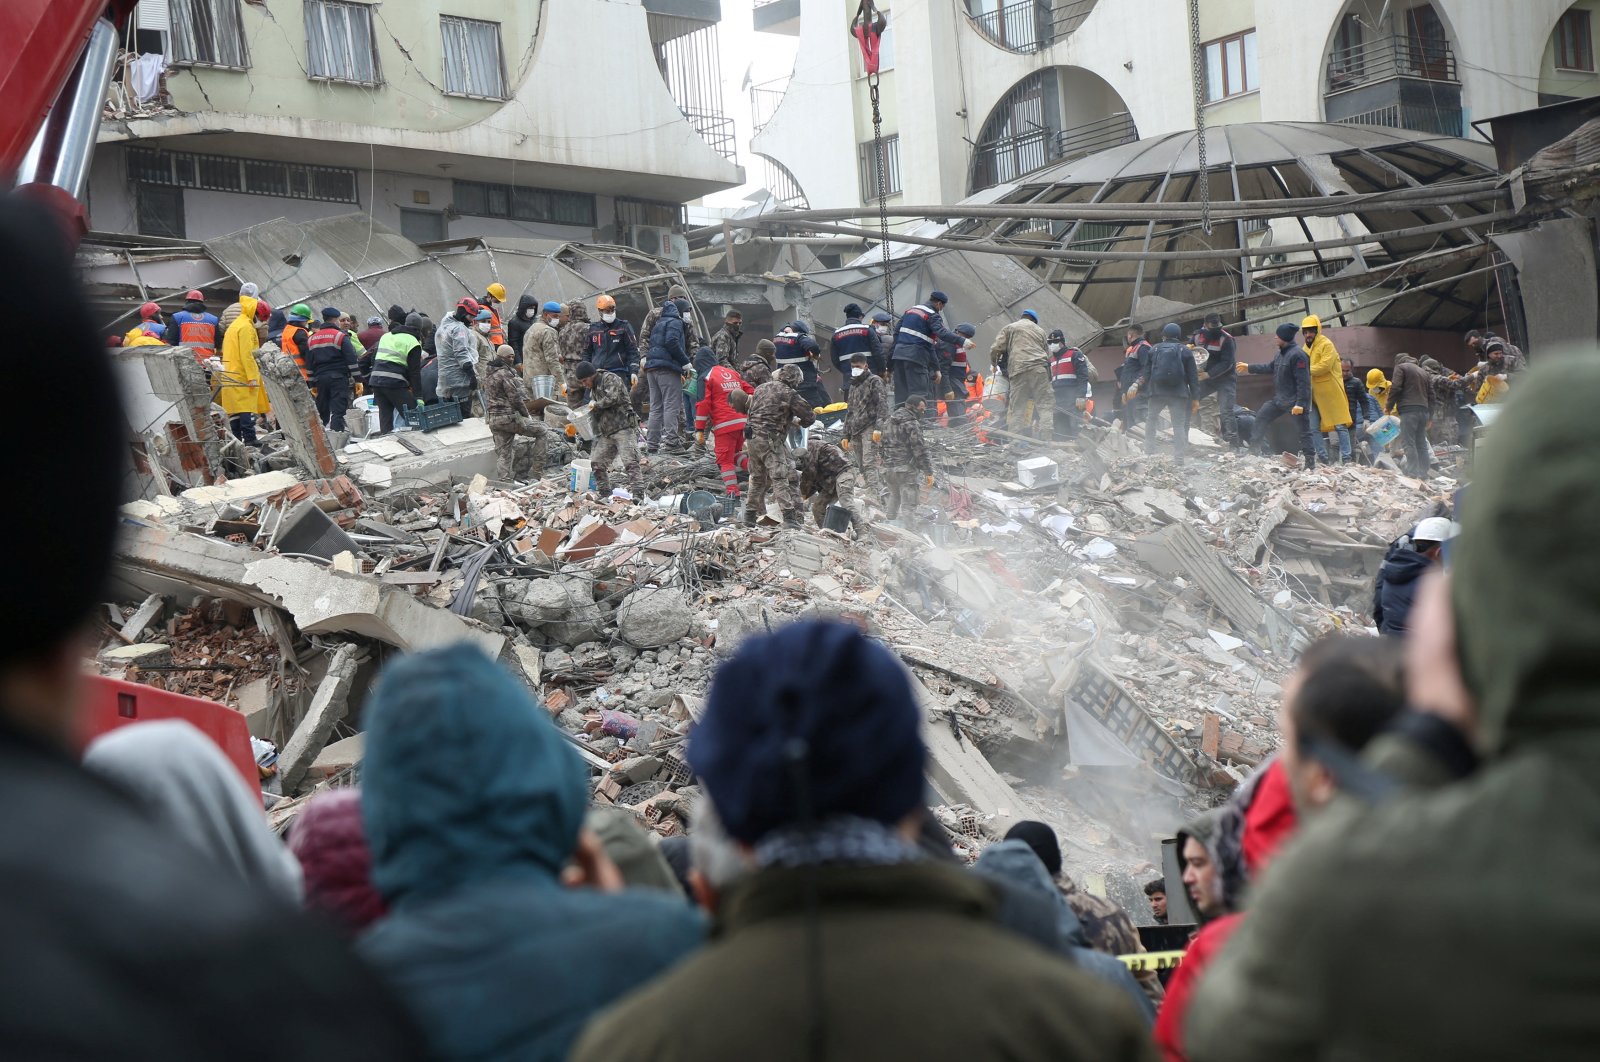 Rescue workers search for survivors under the rubble following an earthquake, Diyarbakır, February 6, 2023. (Reuters Photo)